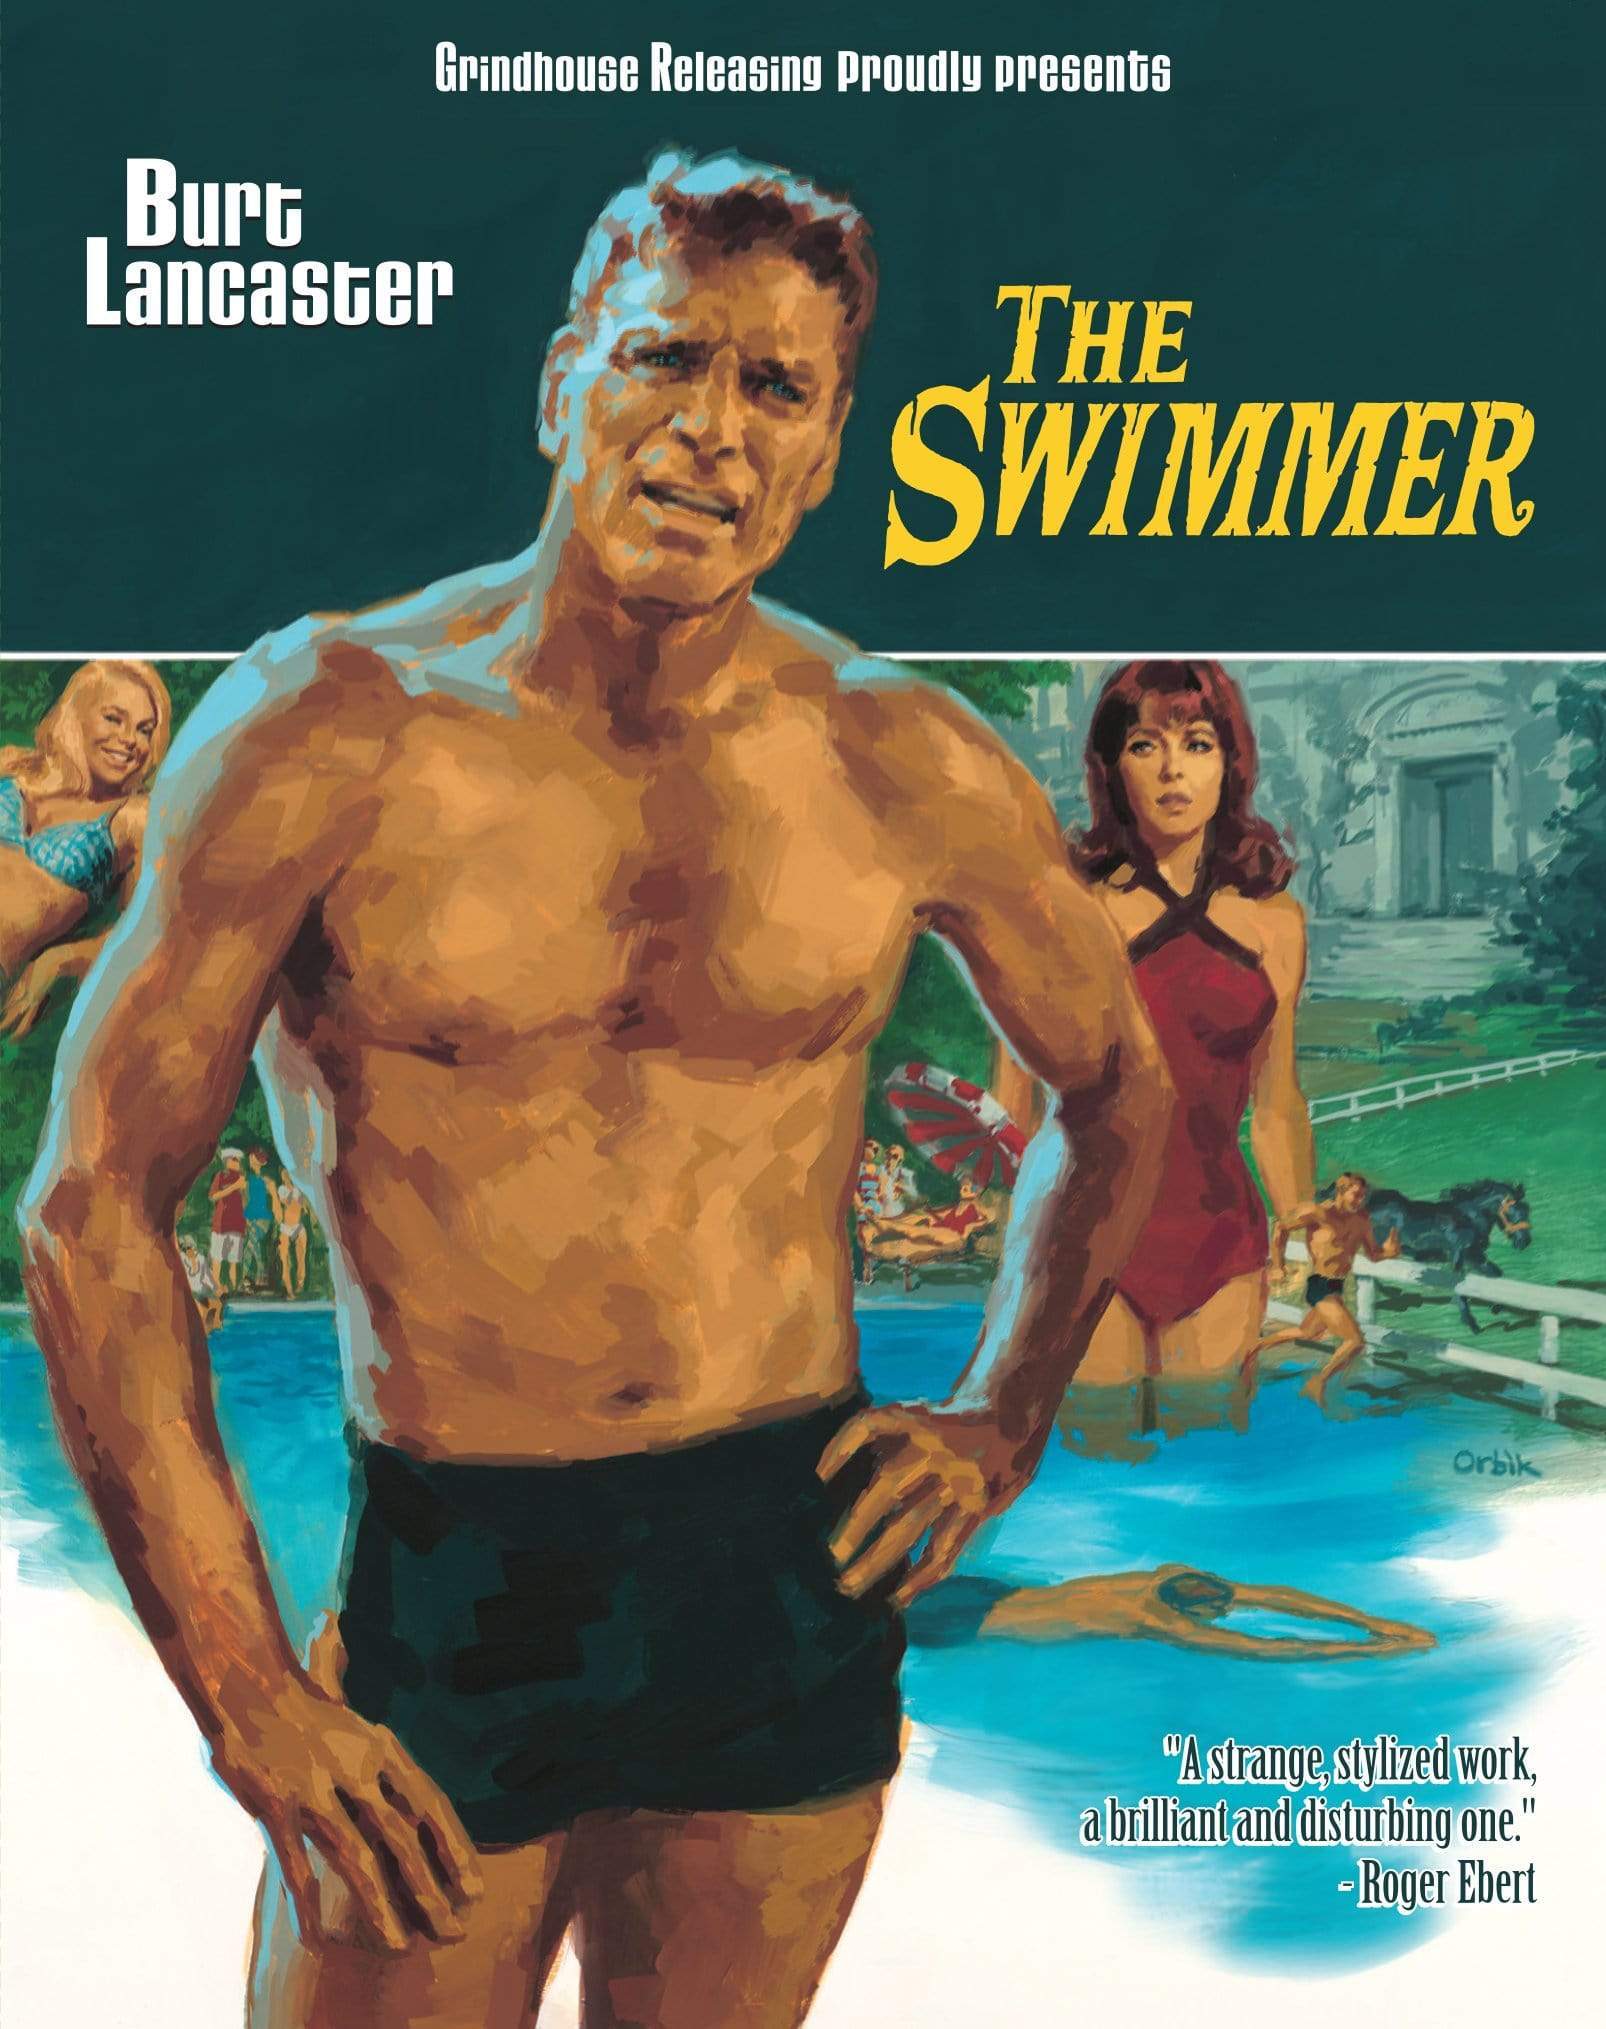 The Swimmer (3 Disc LE Slipcover Grindhouse Releasing) (Blu-Ray)